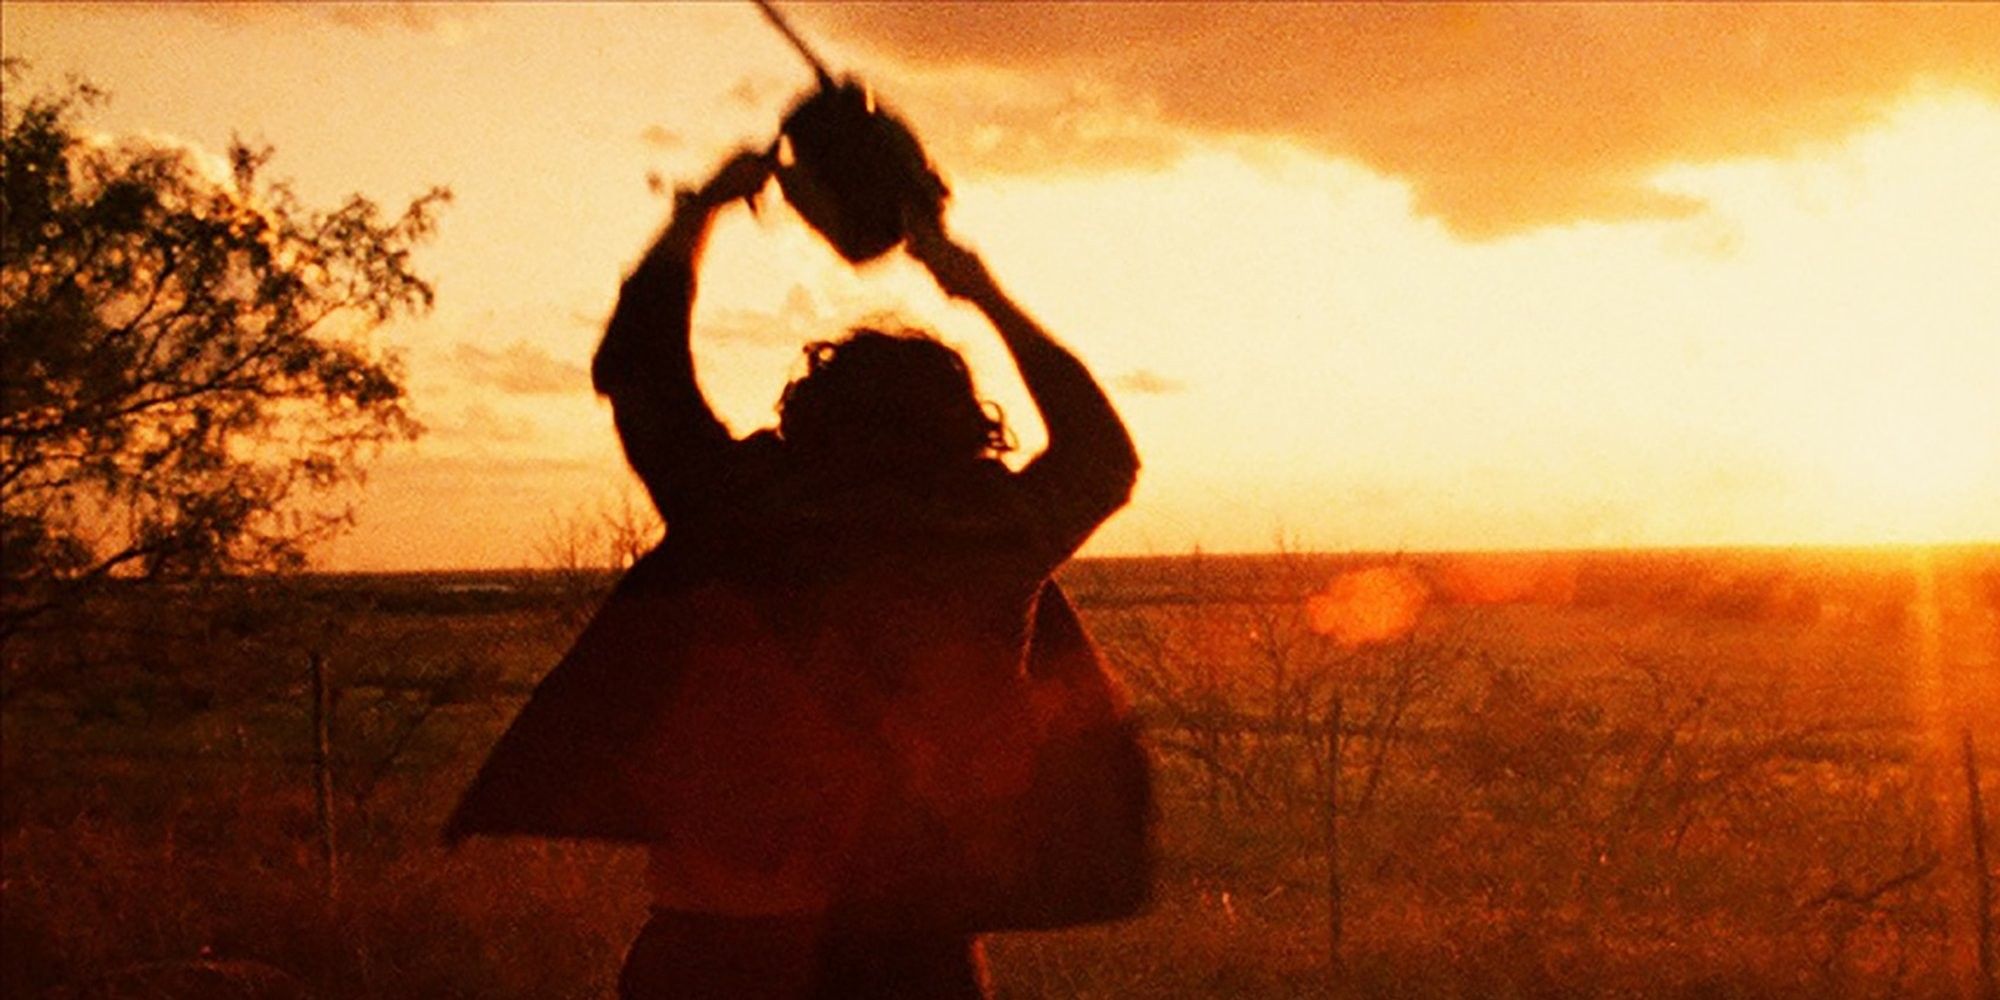 Leatherface at the end of Texas Chainsaw Massacre 1974